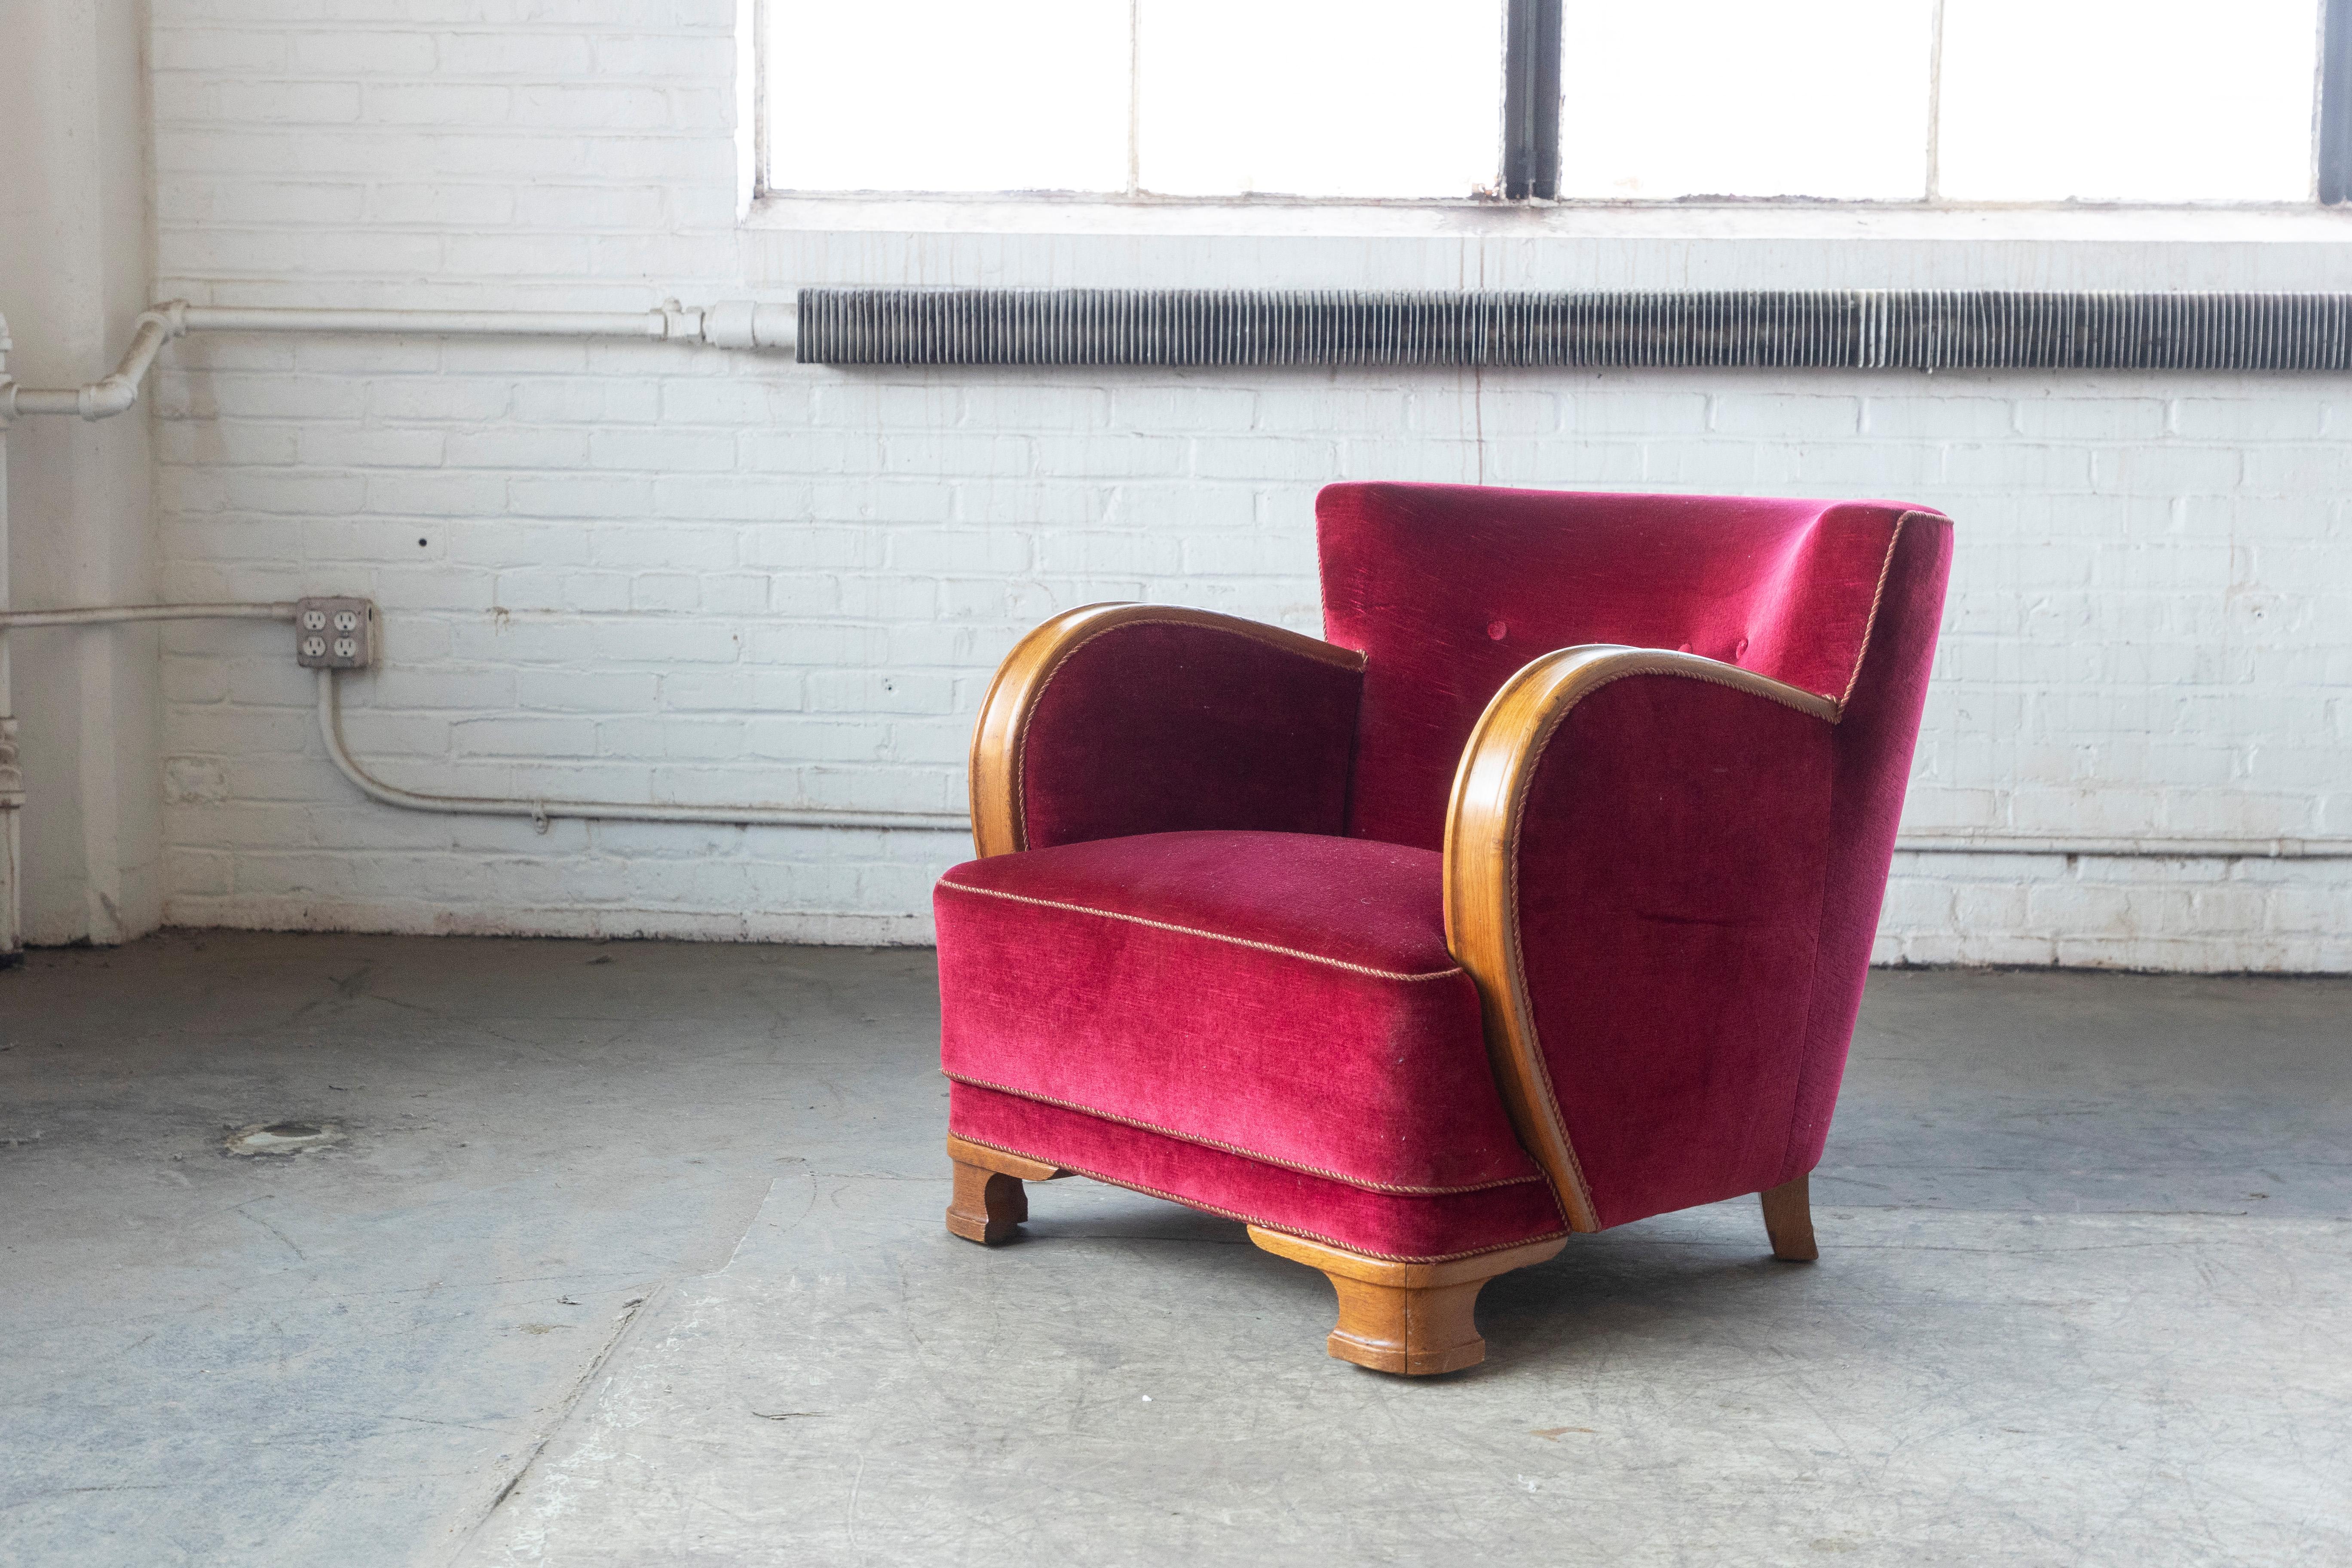 Curvy and eye-catching Danish club chair from the 1930s or 1940s. Set on oak feet typical of the art 